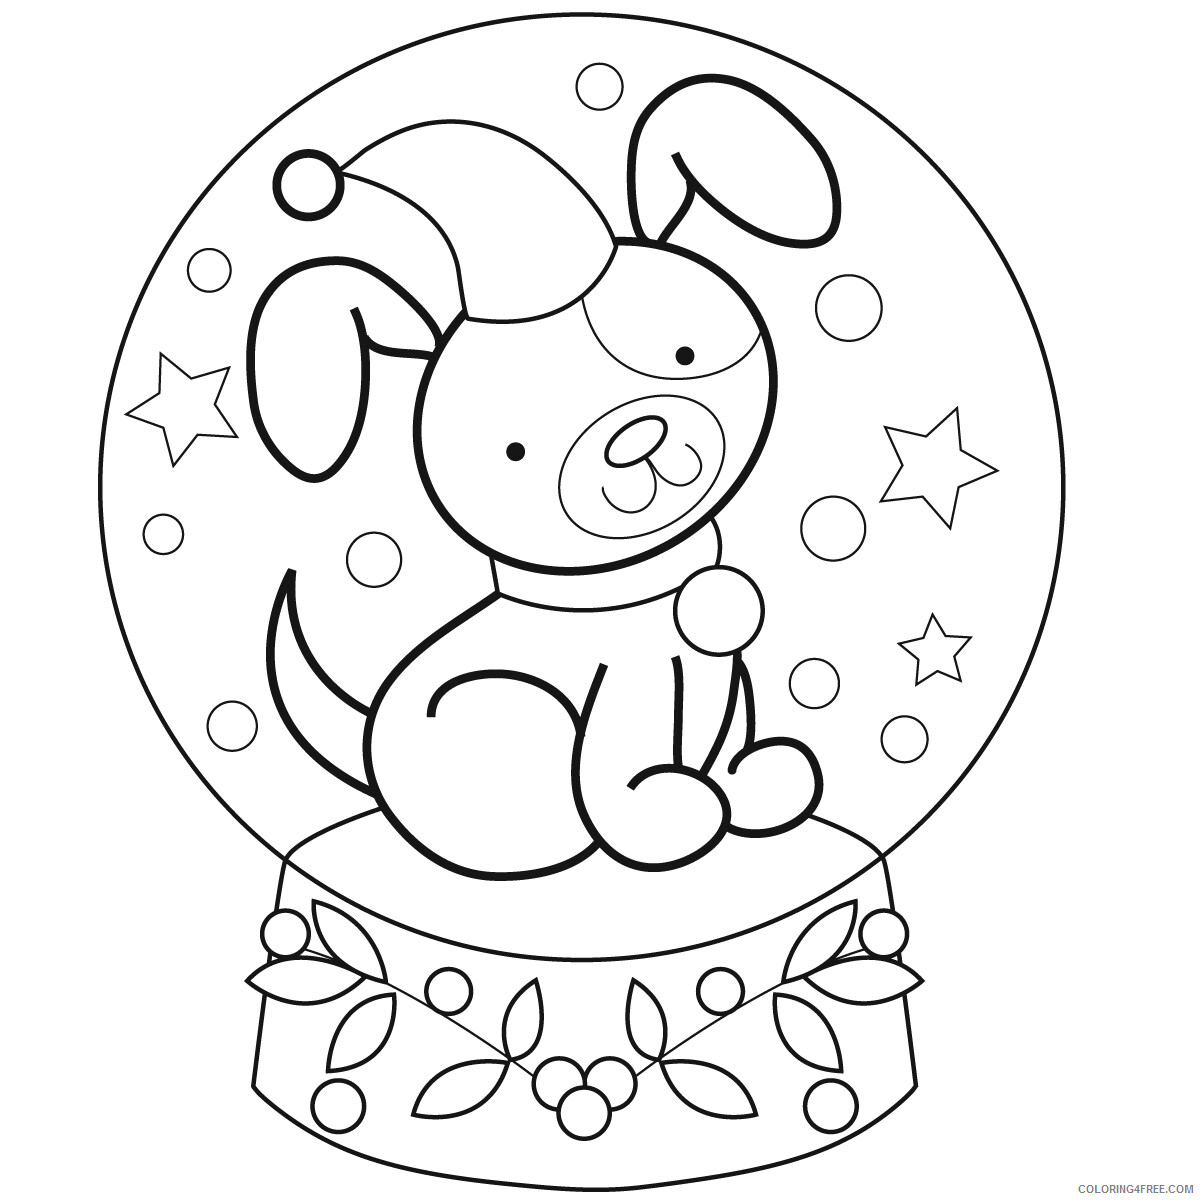 Puppy Coloring Pages Animal Printable Sheets Puppy Snowglobe 2021 4115 Coloring4free